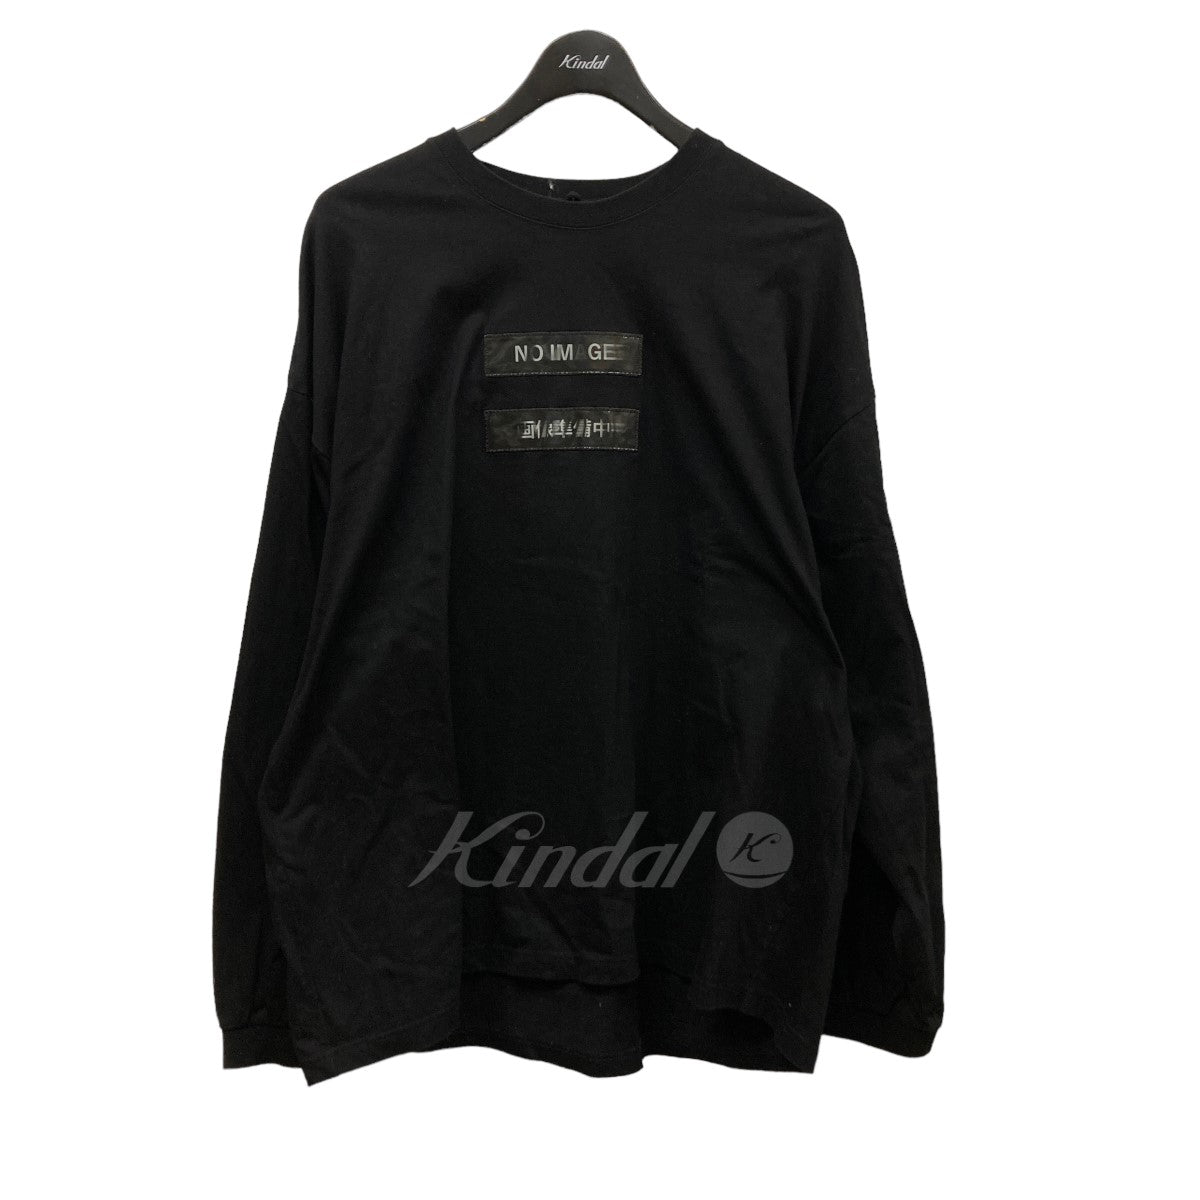 doublet(ダブレット) 「NO IMAGE LENTICULAR LONG SLEEVE T-SHIRT ...